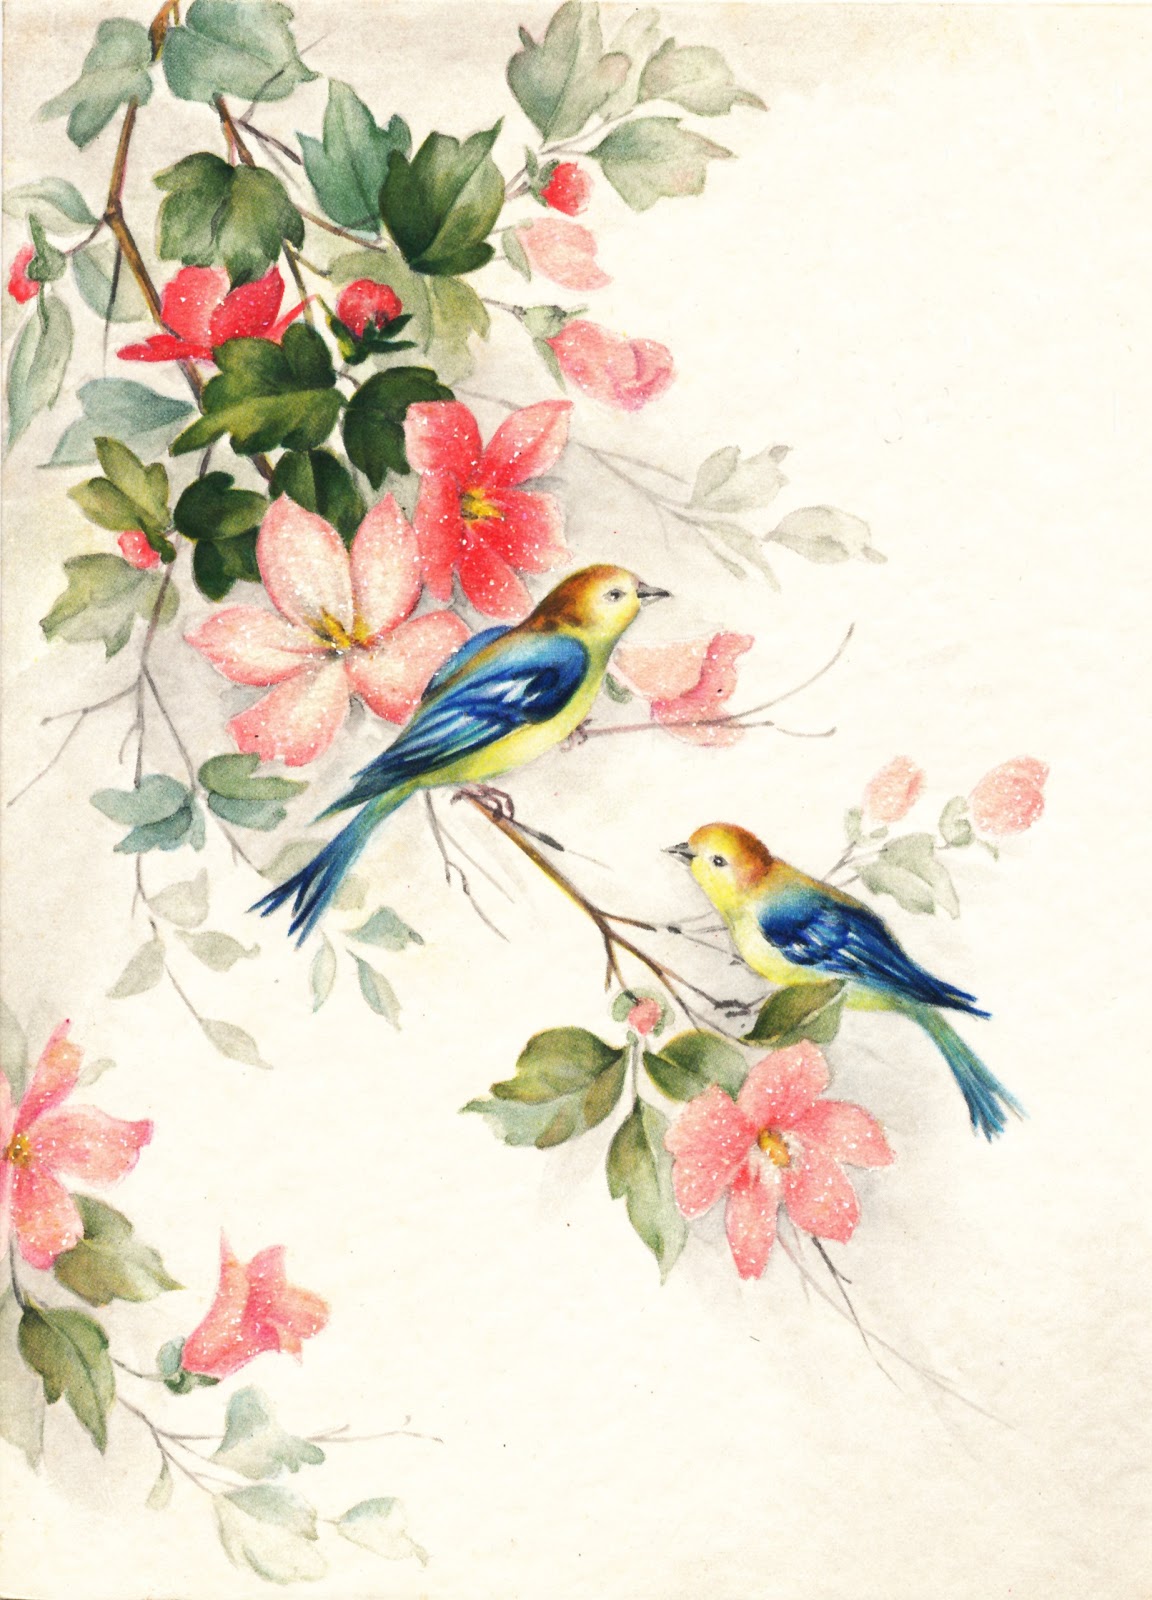 floral and bird wallpaper,bird,watercolor paint,branch,botany,plant